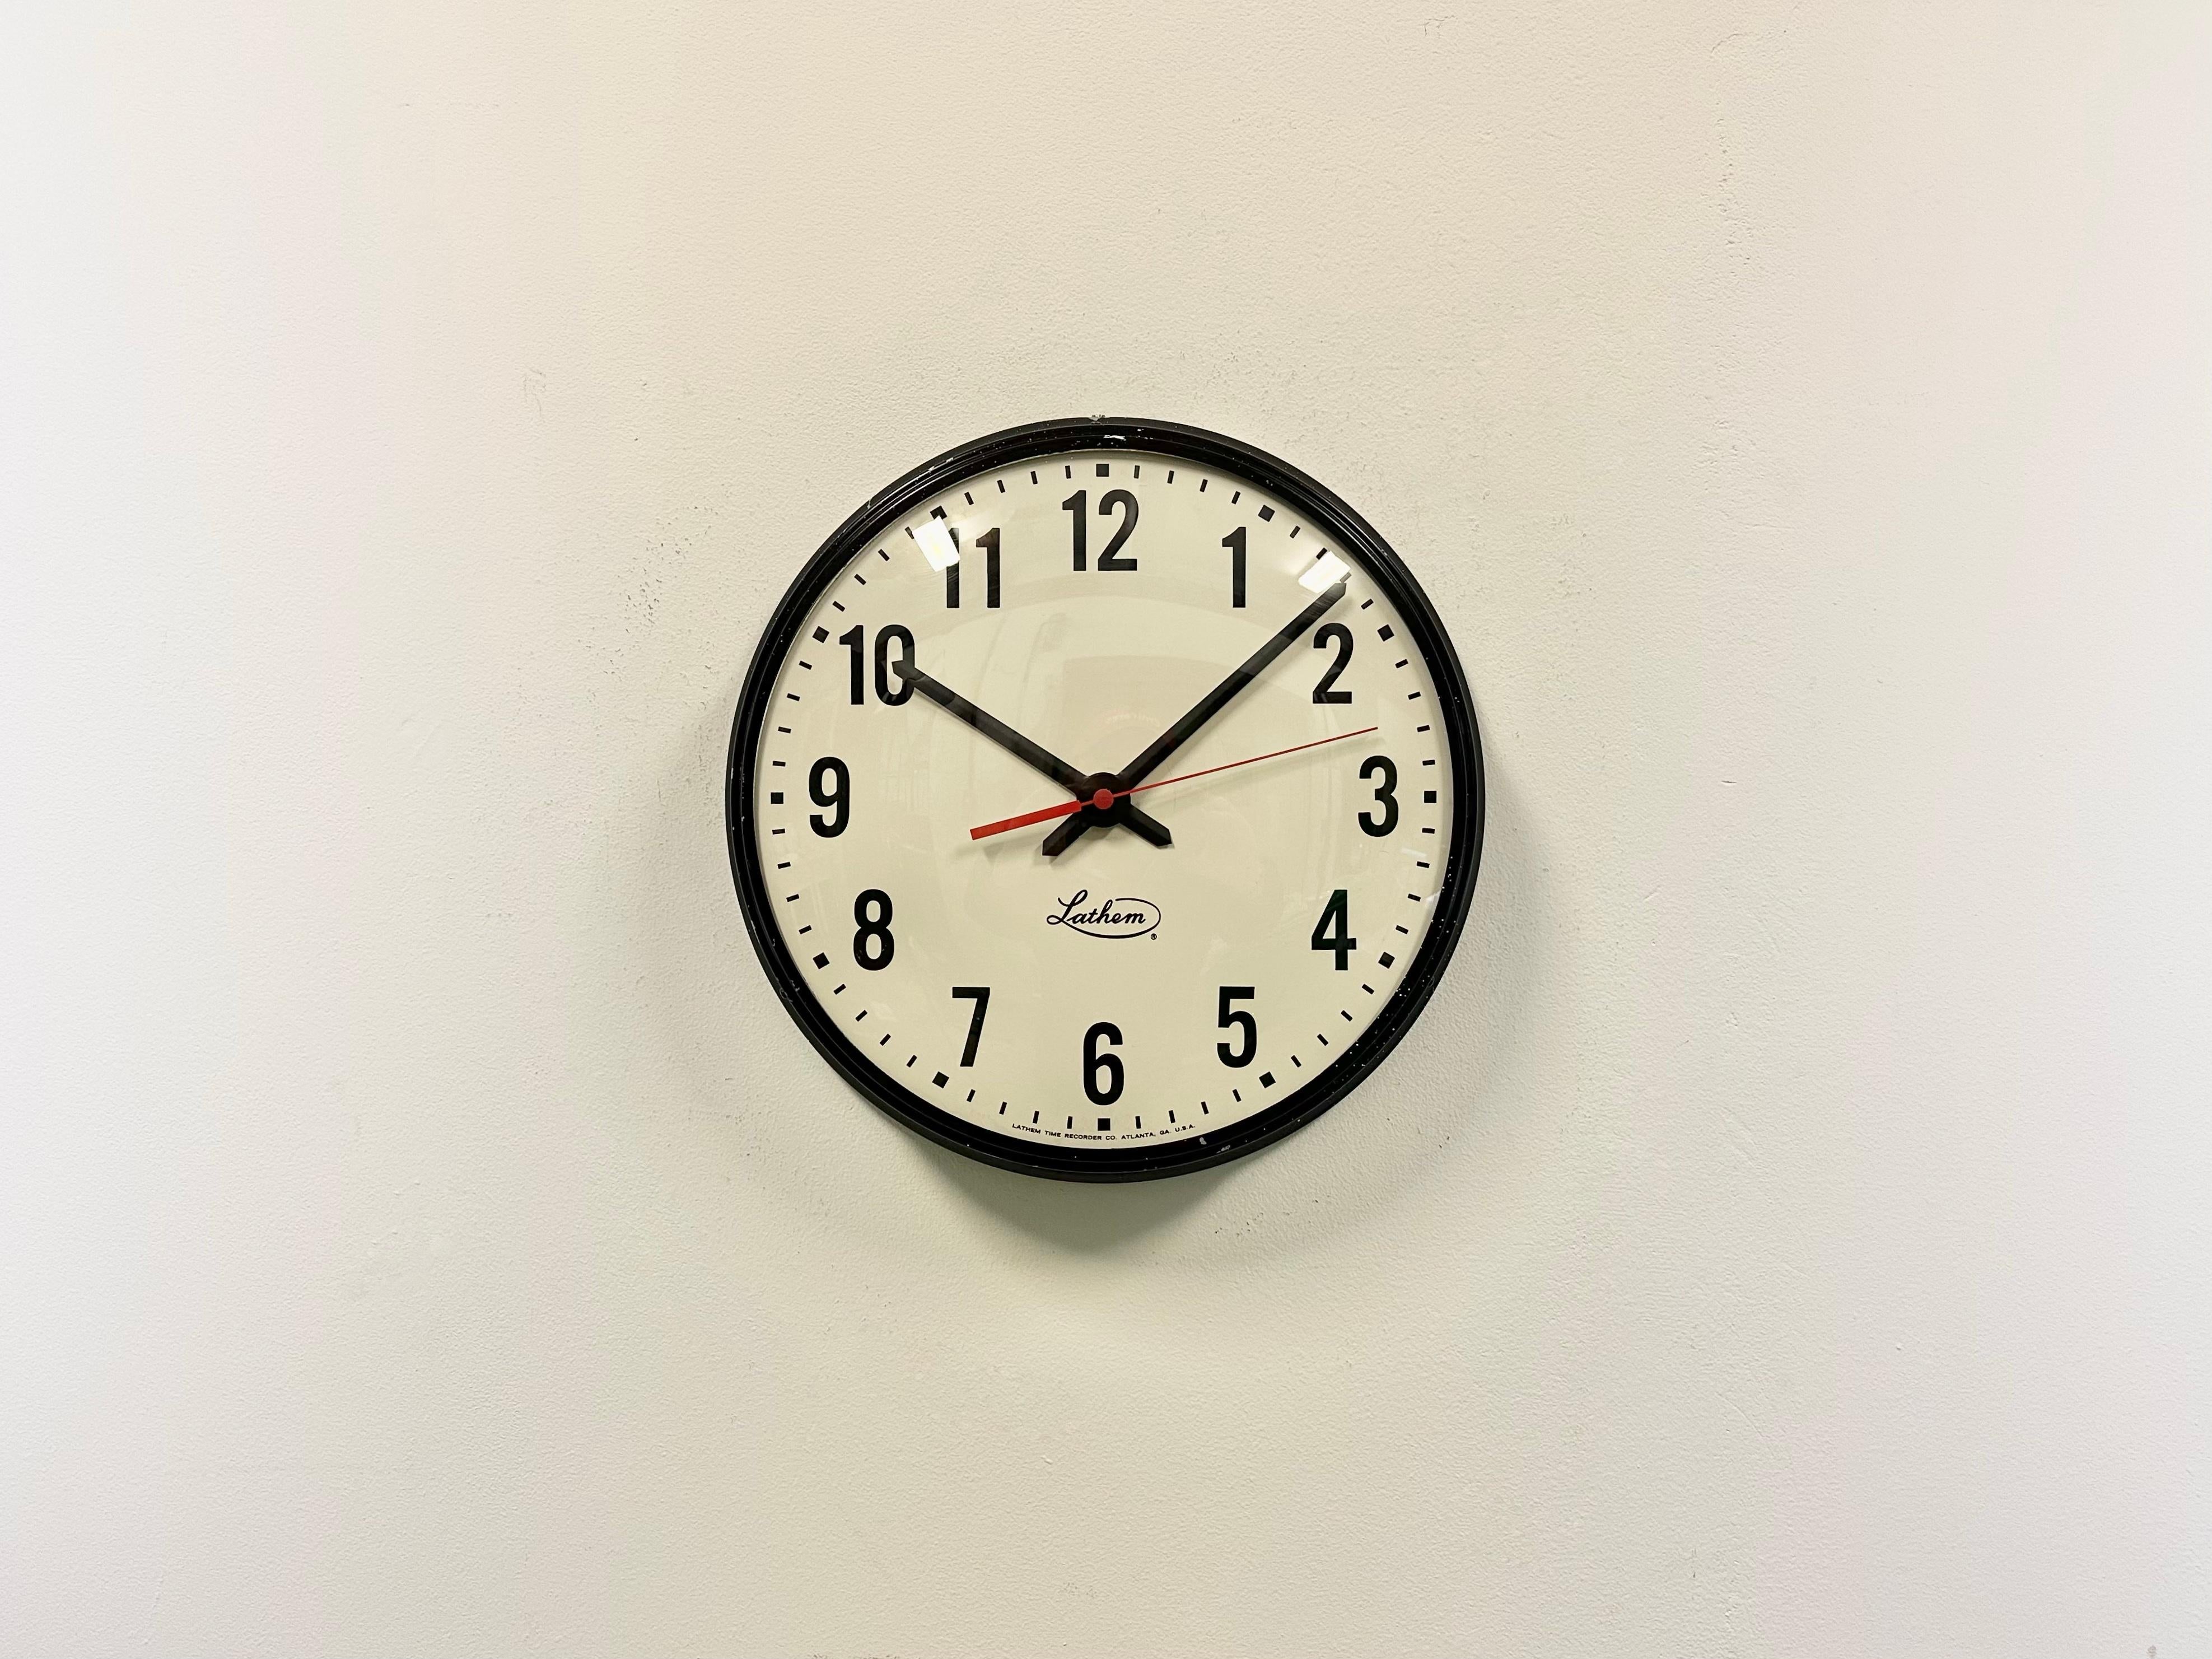 This wall clock was produced by Lathem in United states during the 1980s. It features a black metal frame, a metal dial and a convex clear glass cover. The piece has been converted into a battery-powered clockwork and requires only one AA-battery.